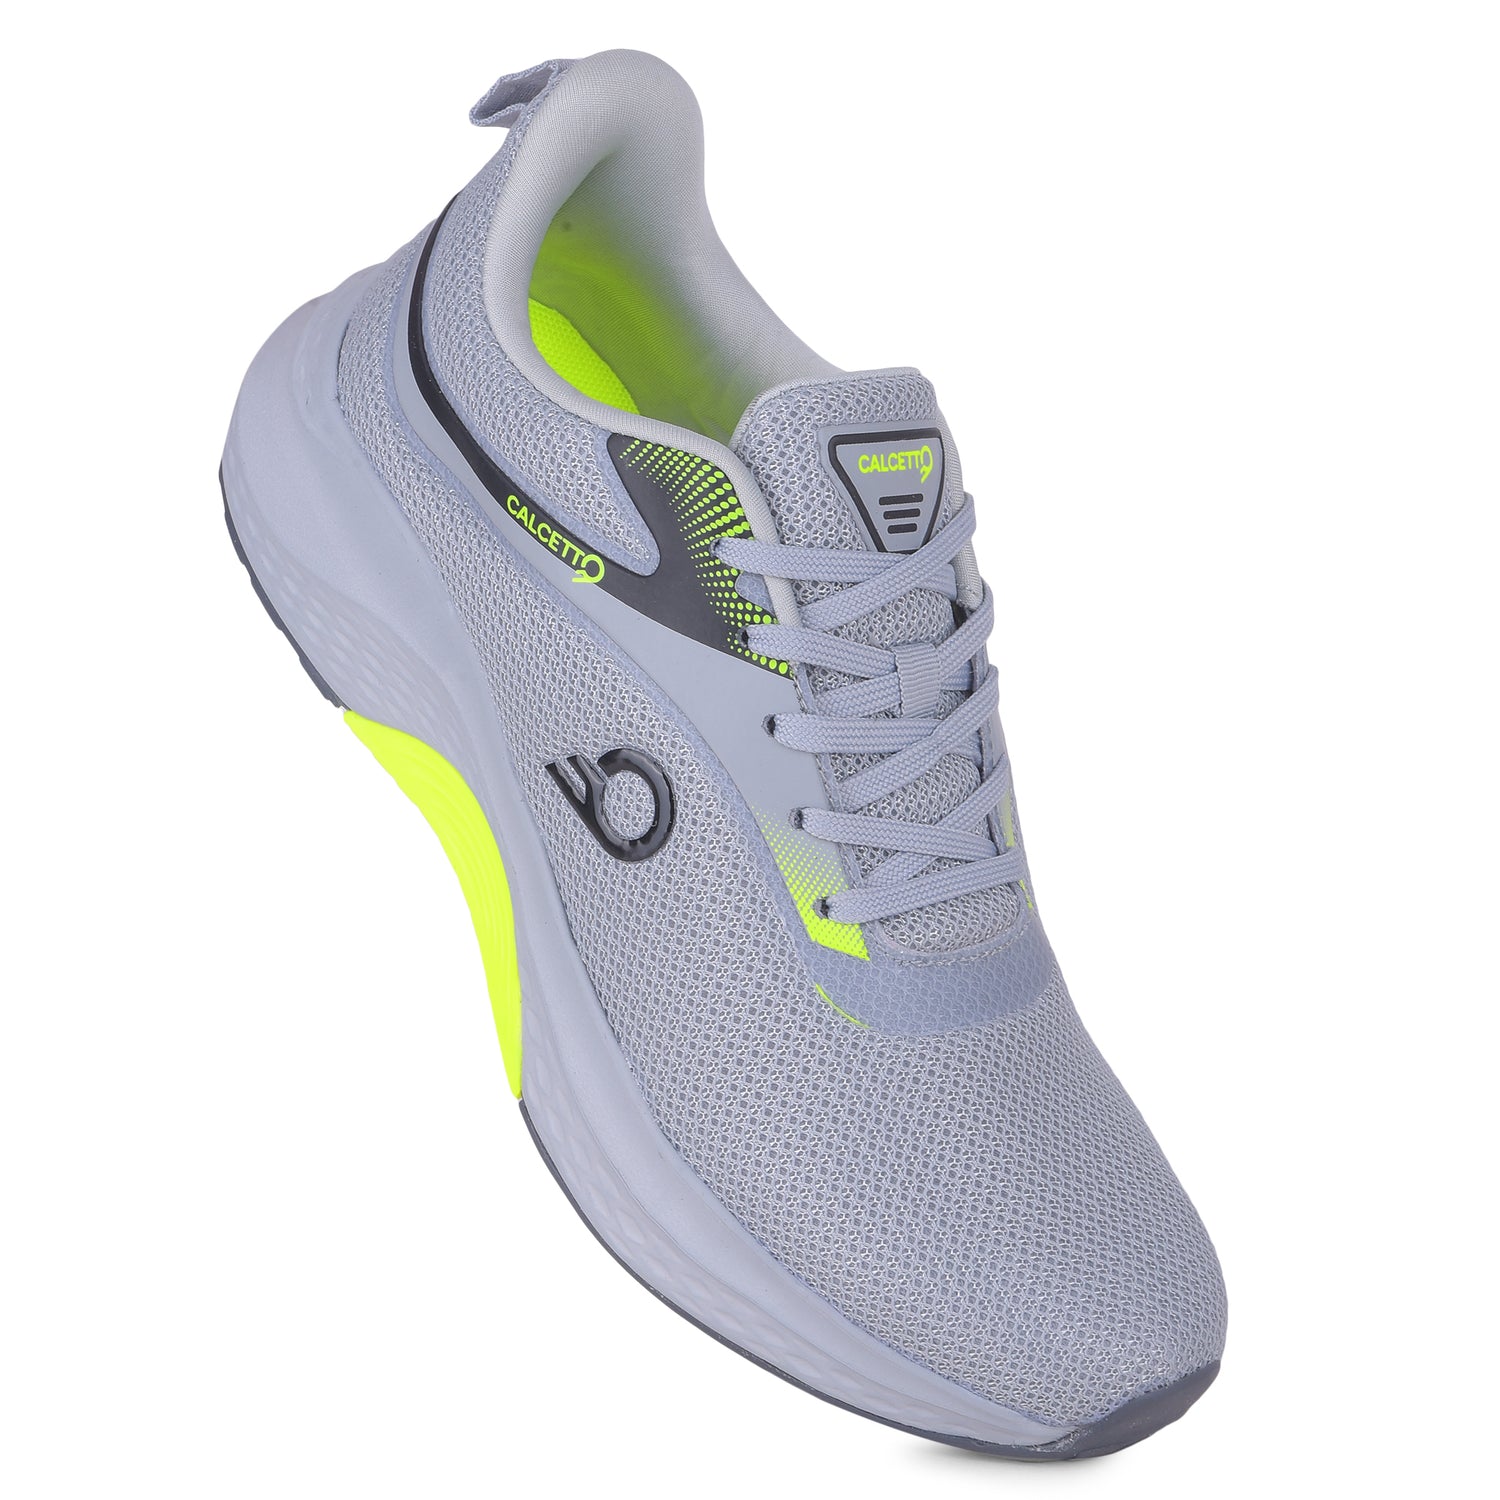 Calcetto CLT-2032 L Grey Lime Men Running Shoe